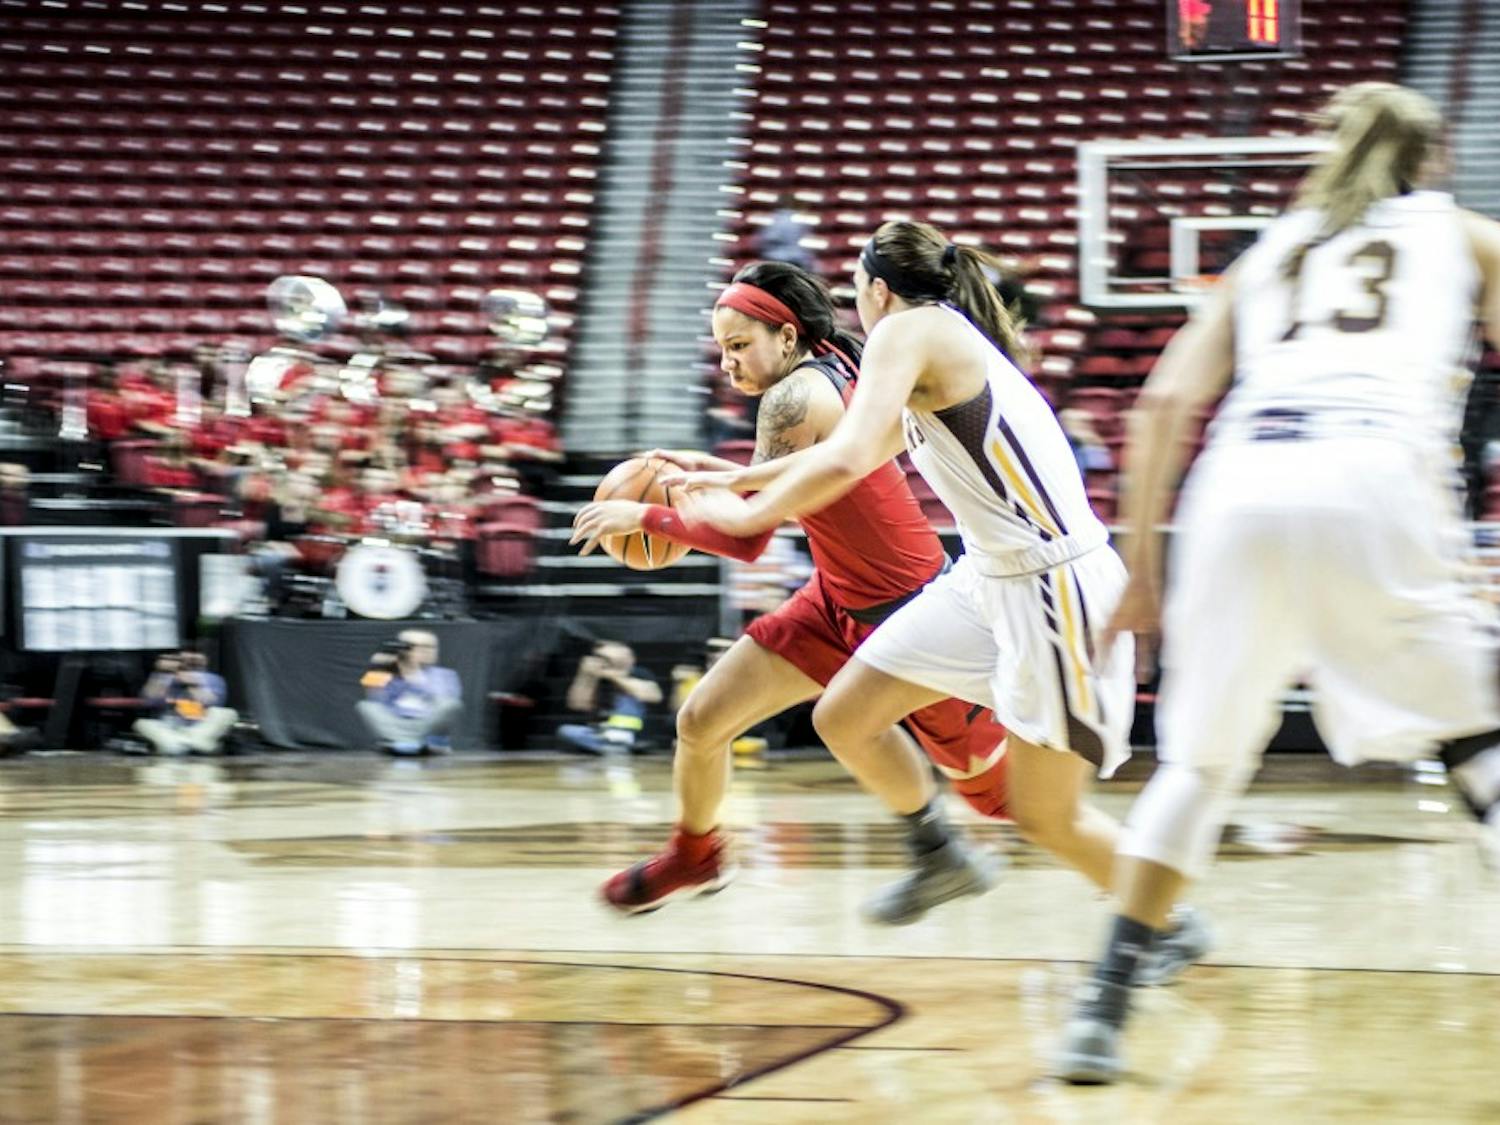 Cherise Beynon drives past Taylor Rusk during the second half of Tuesday night's game against Wyoming at Thomas & Mack Arena in Las Vegas, Nevada. The Lobos lost 66-69.